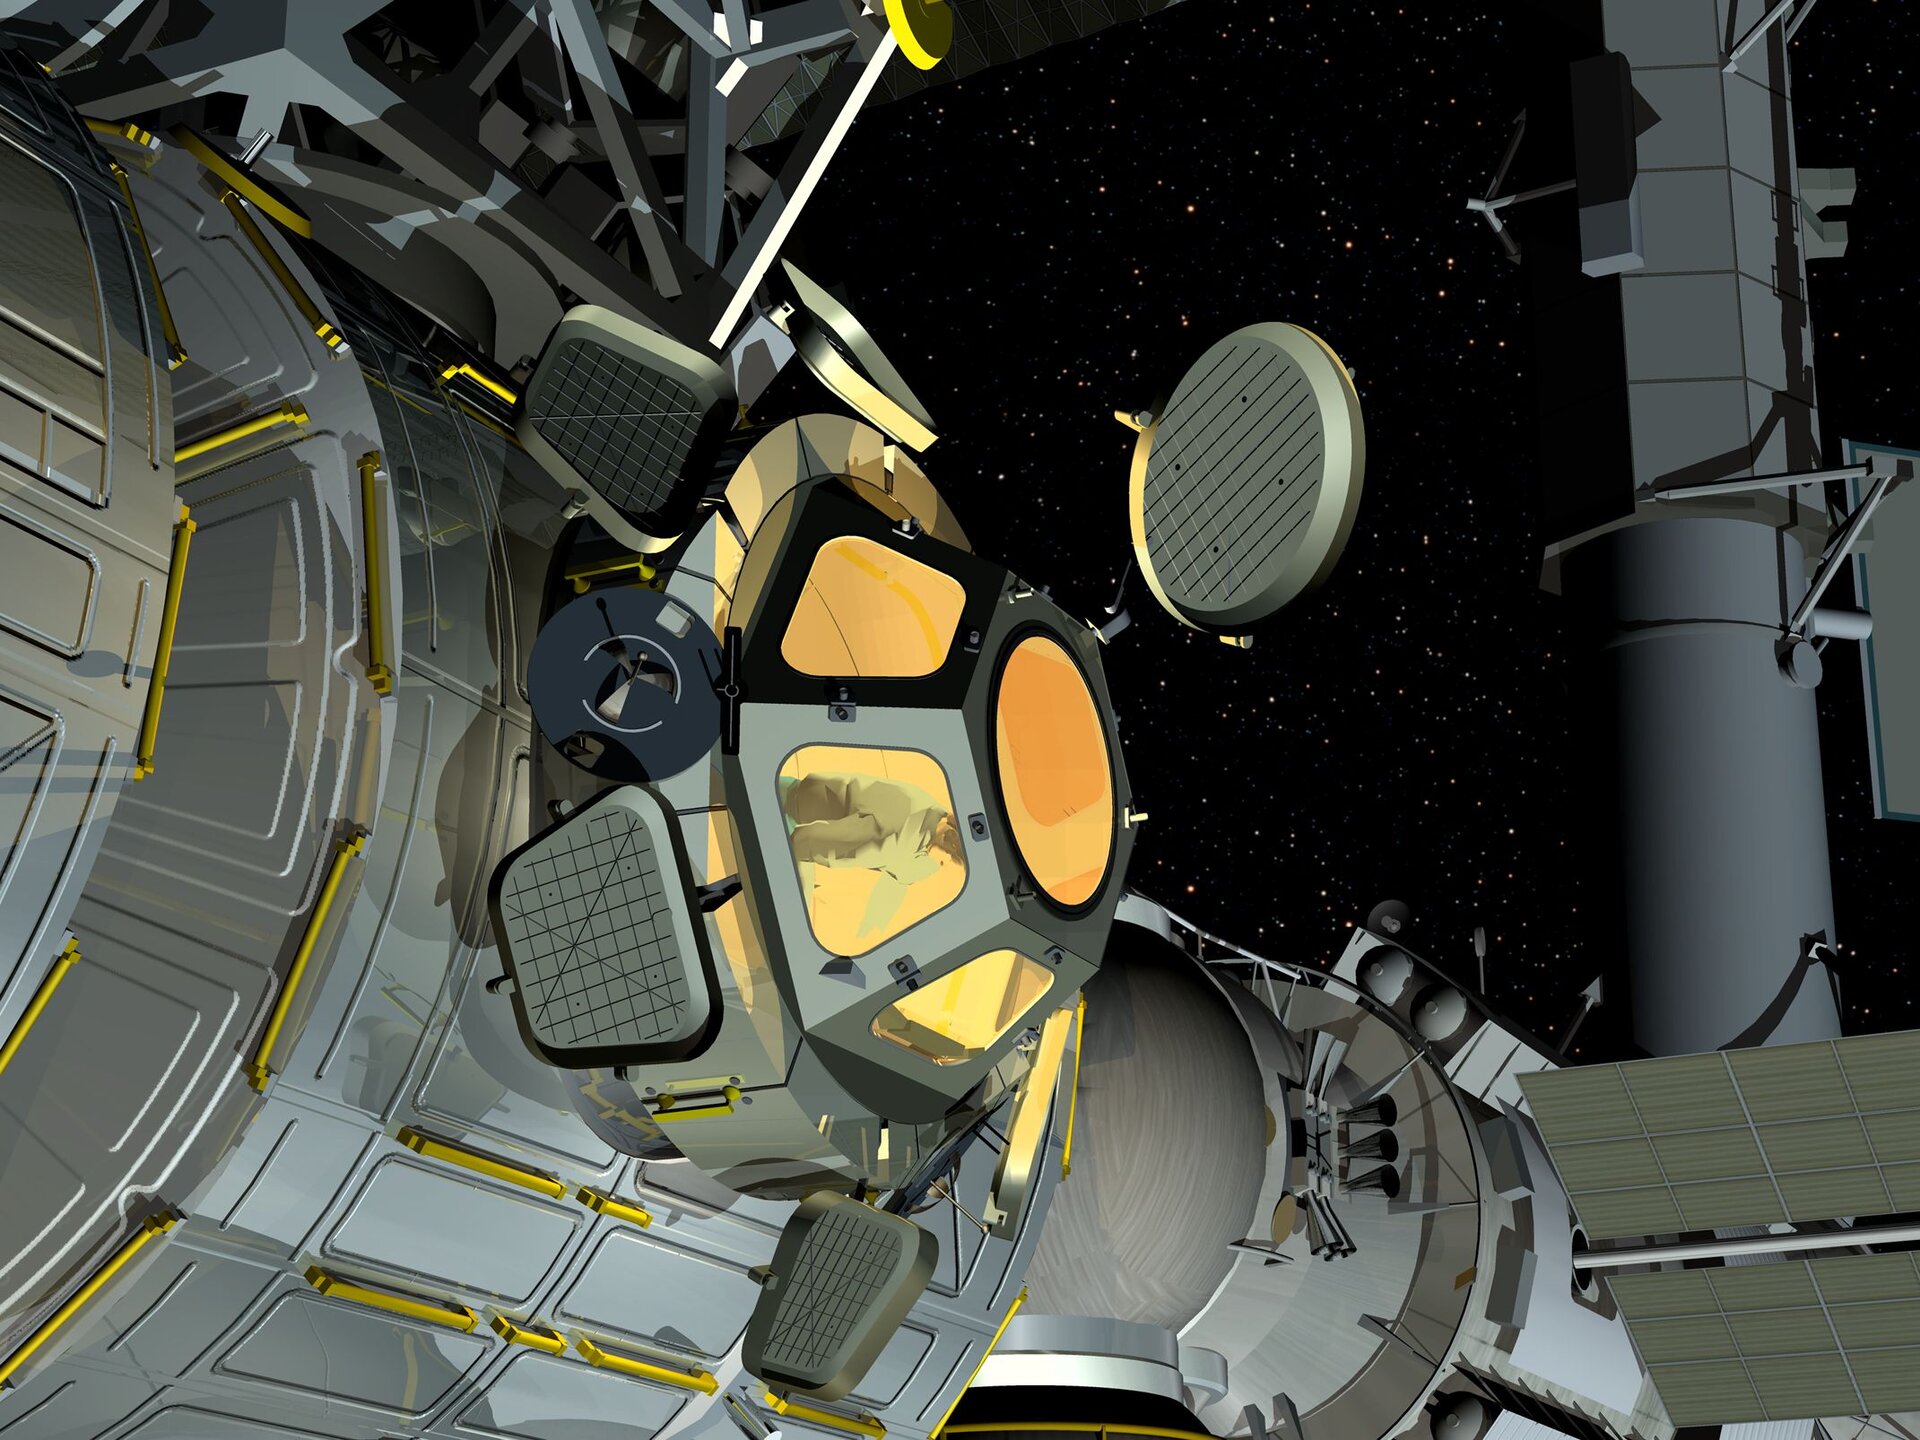 Cupola observation module artist's view